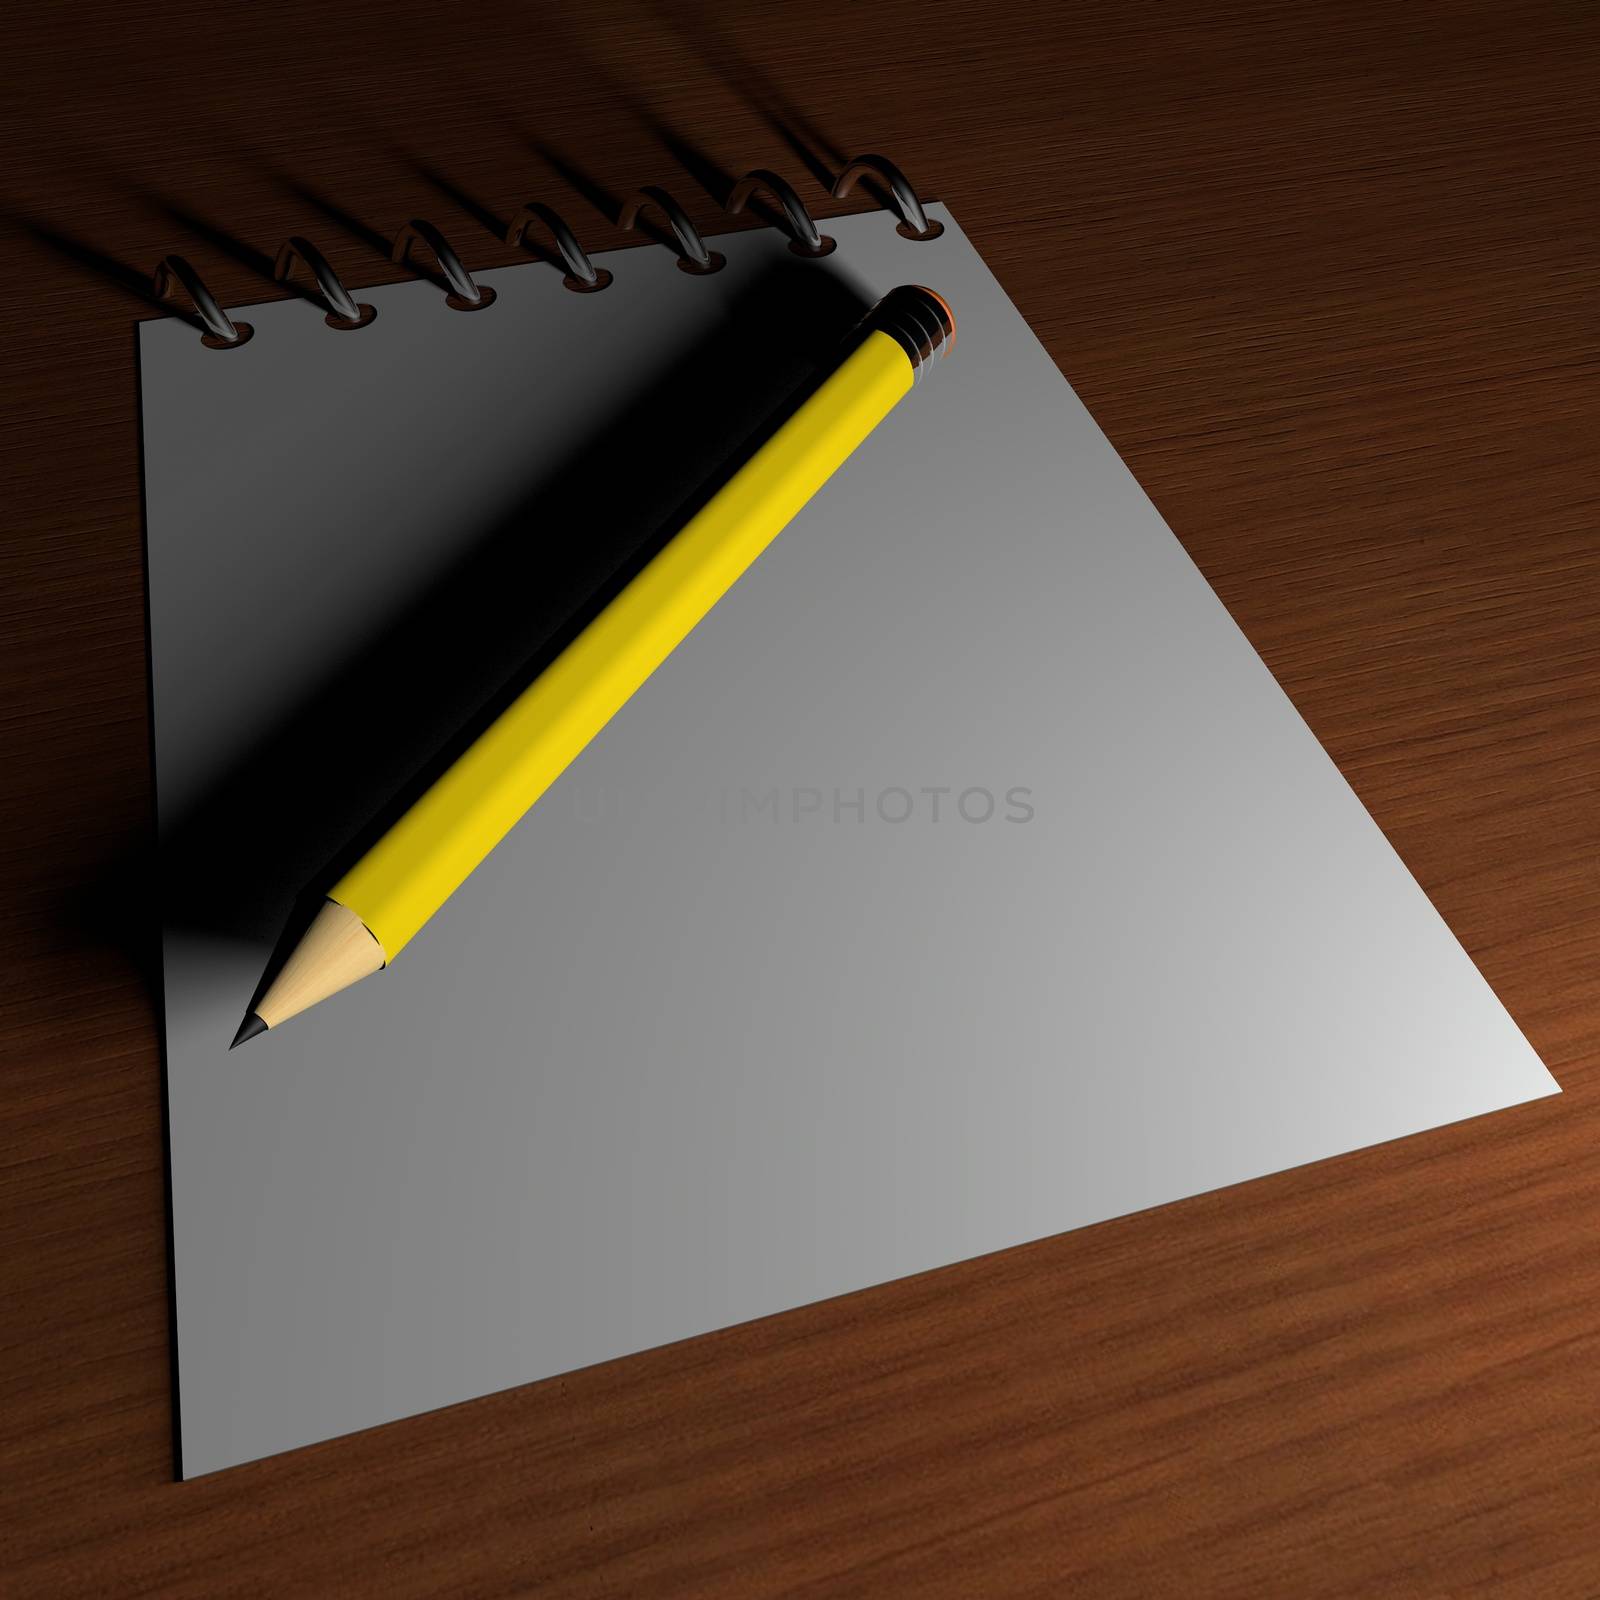 Notebook and pencil by Koufax73